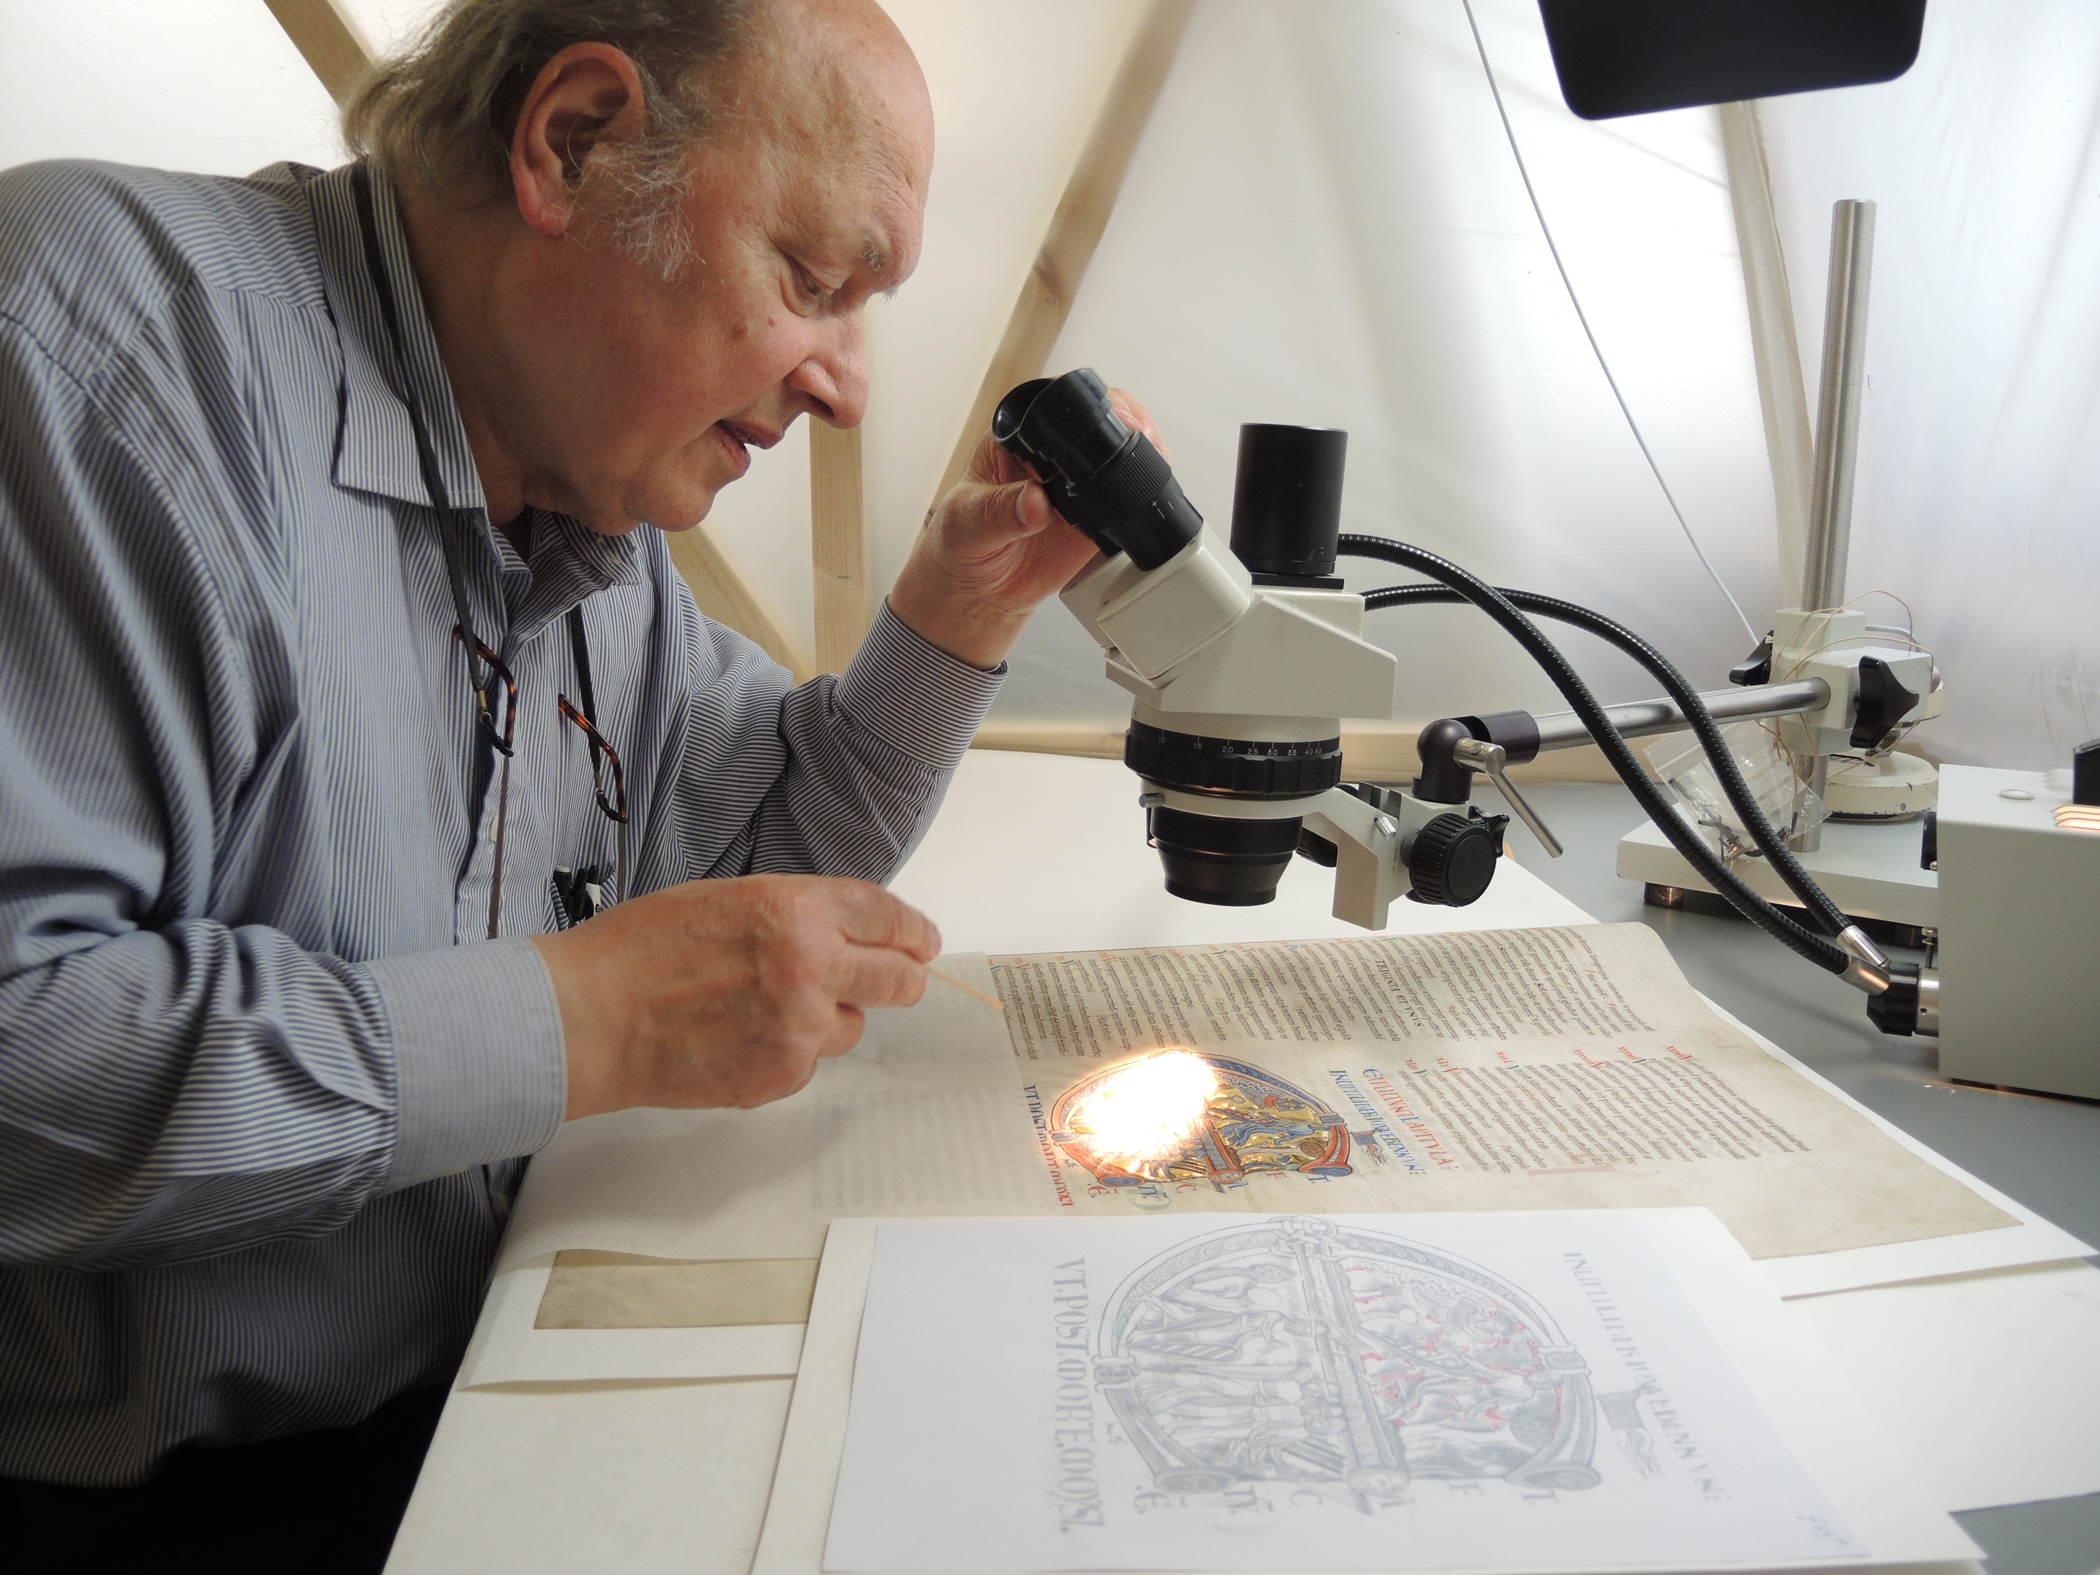 Christopher Clarkson examining a manuscript. Image Copyright Jane Eagan / Winchester Cathedral